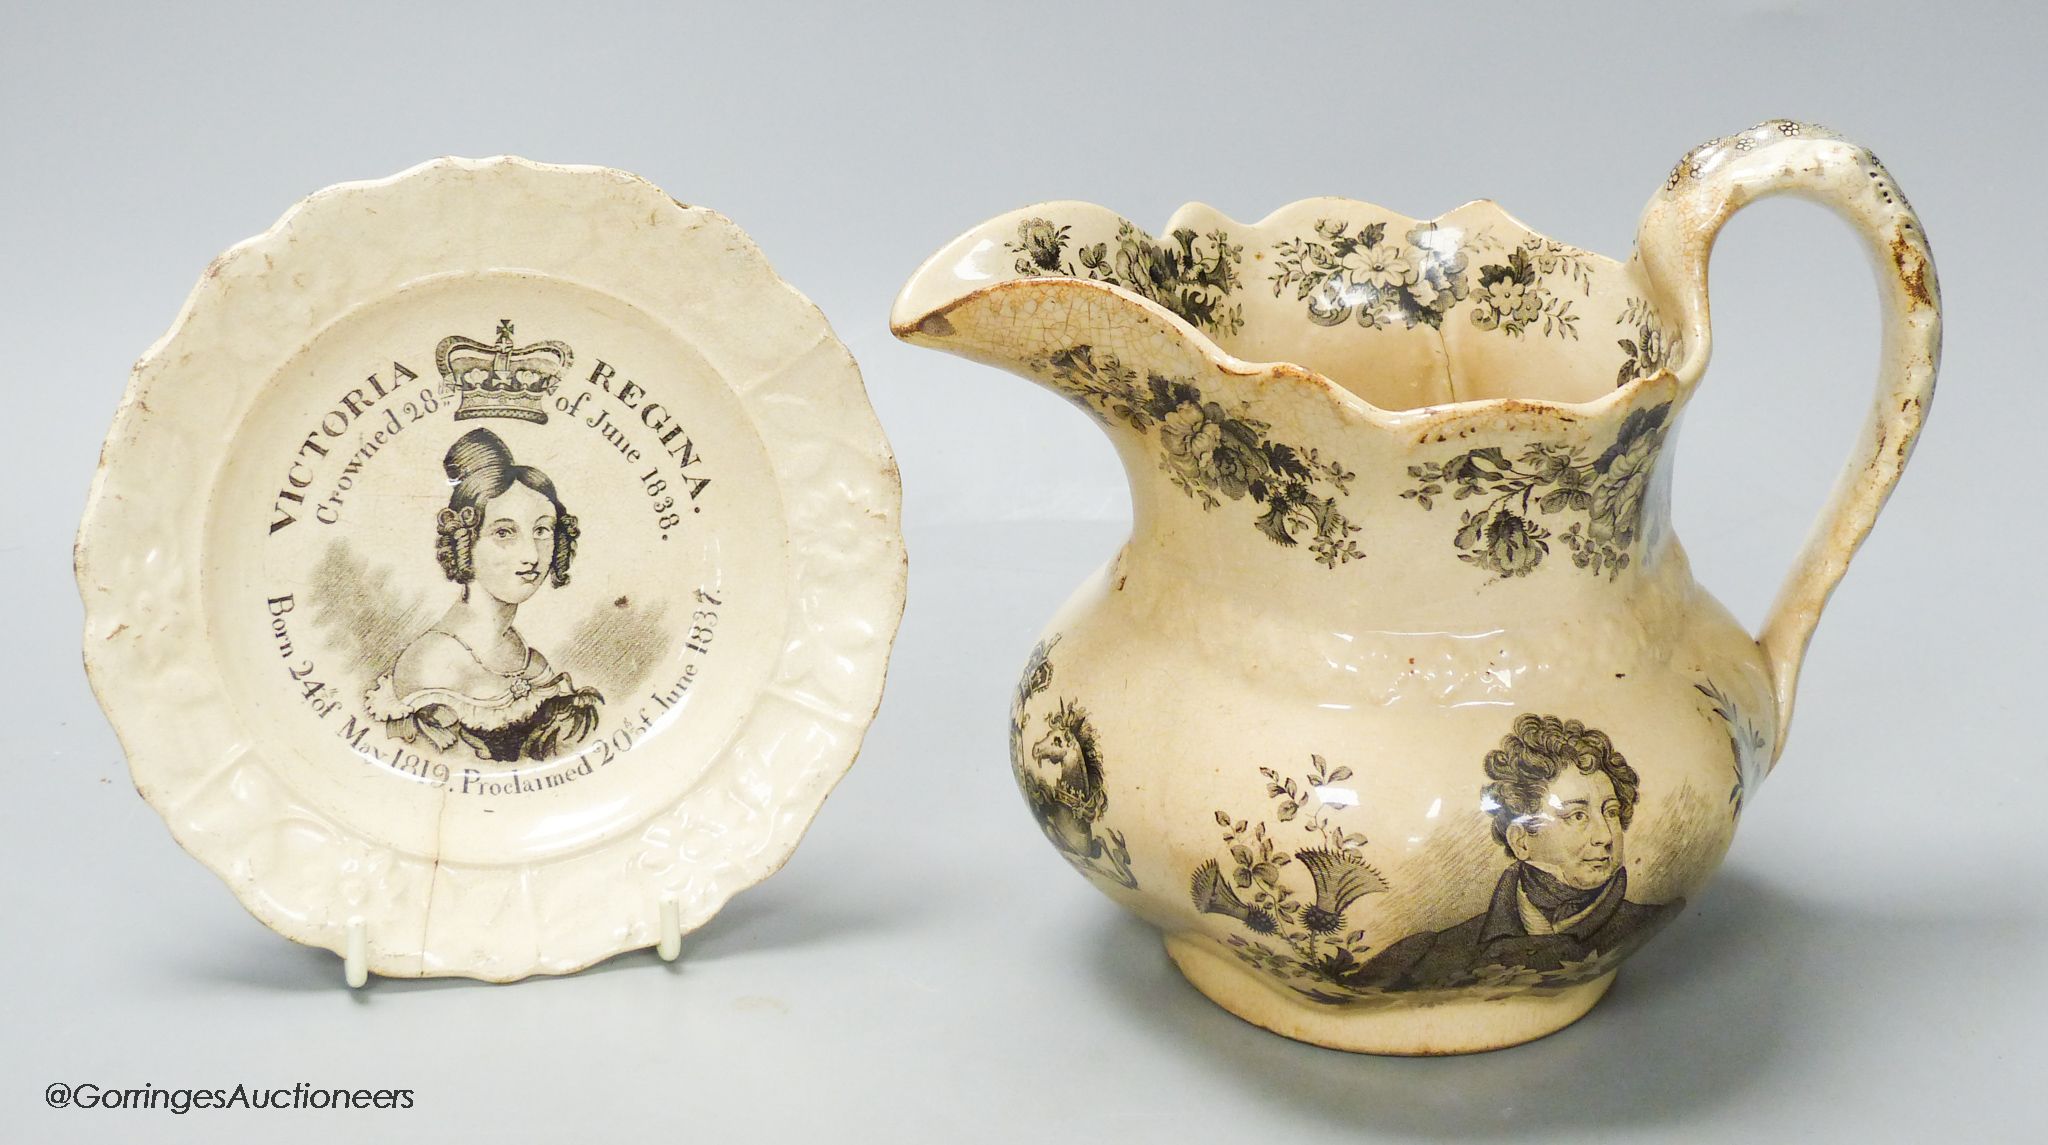 A George IV commemorative jug, height 17cm, and a Queen Victoria coronation plate